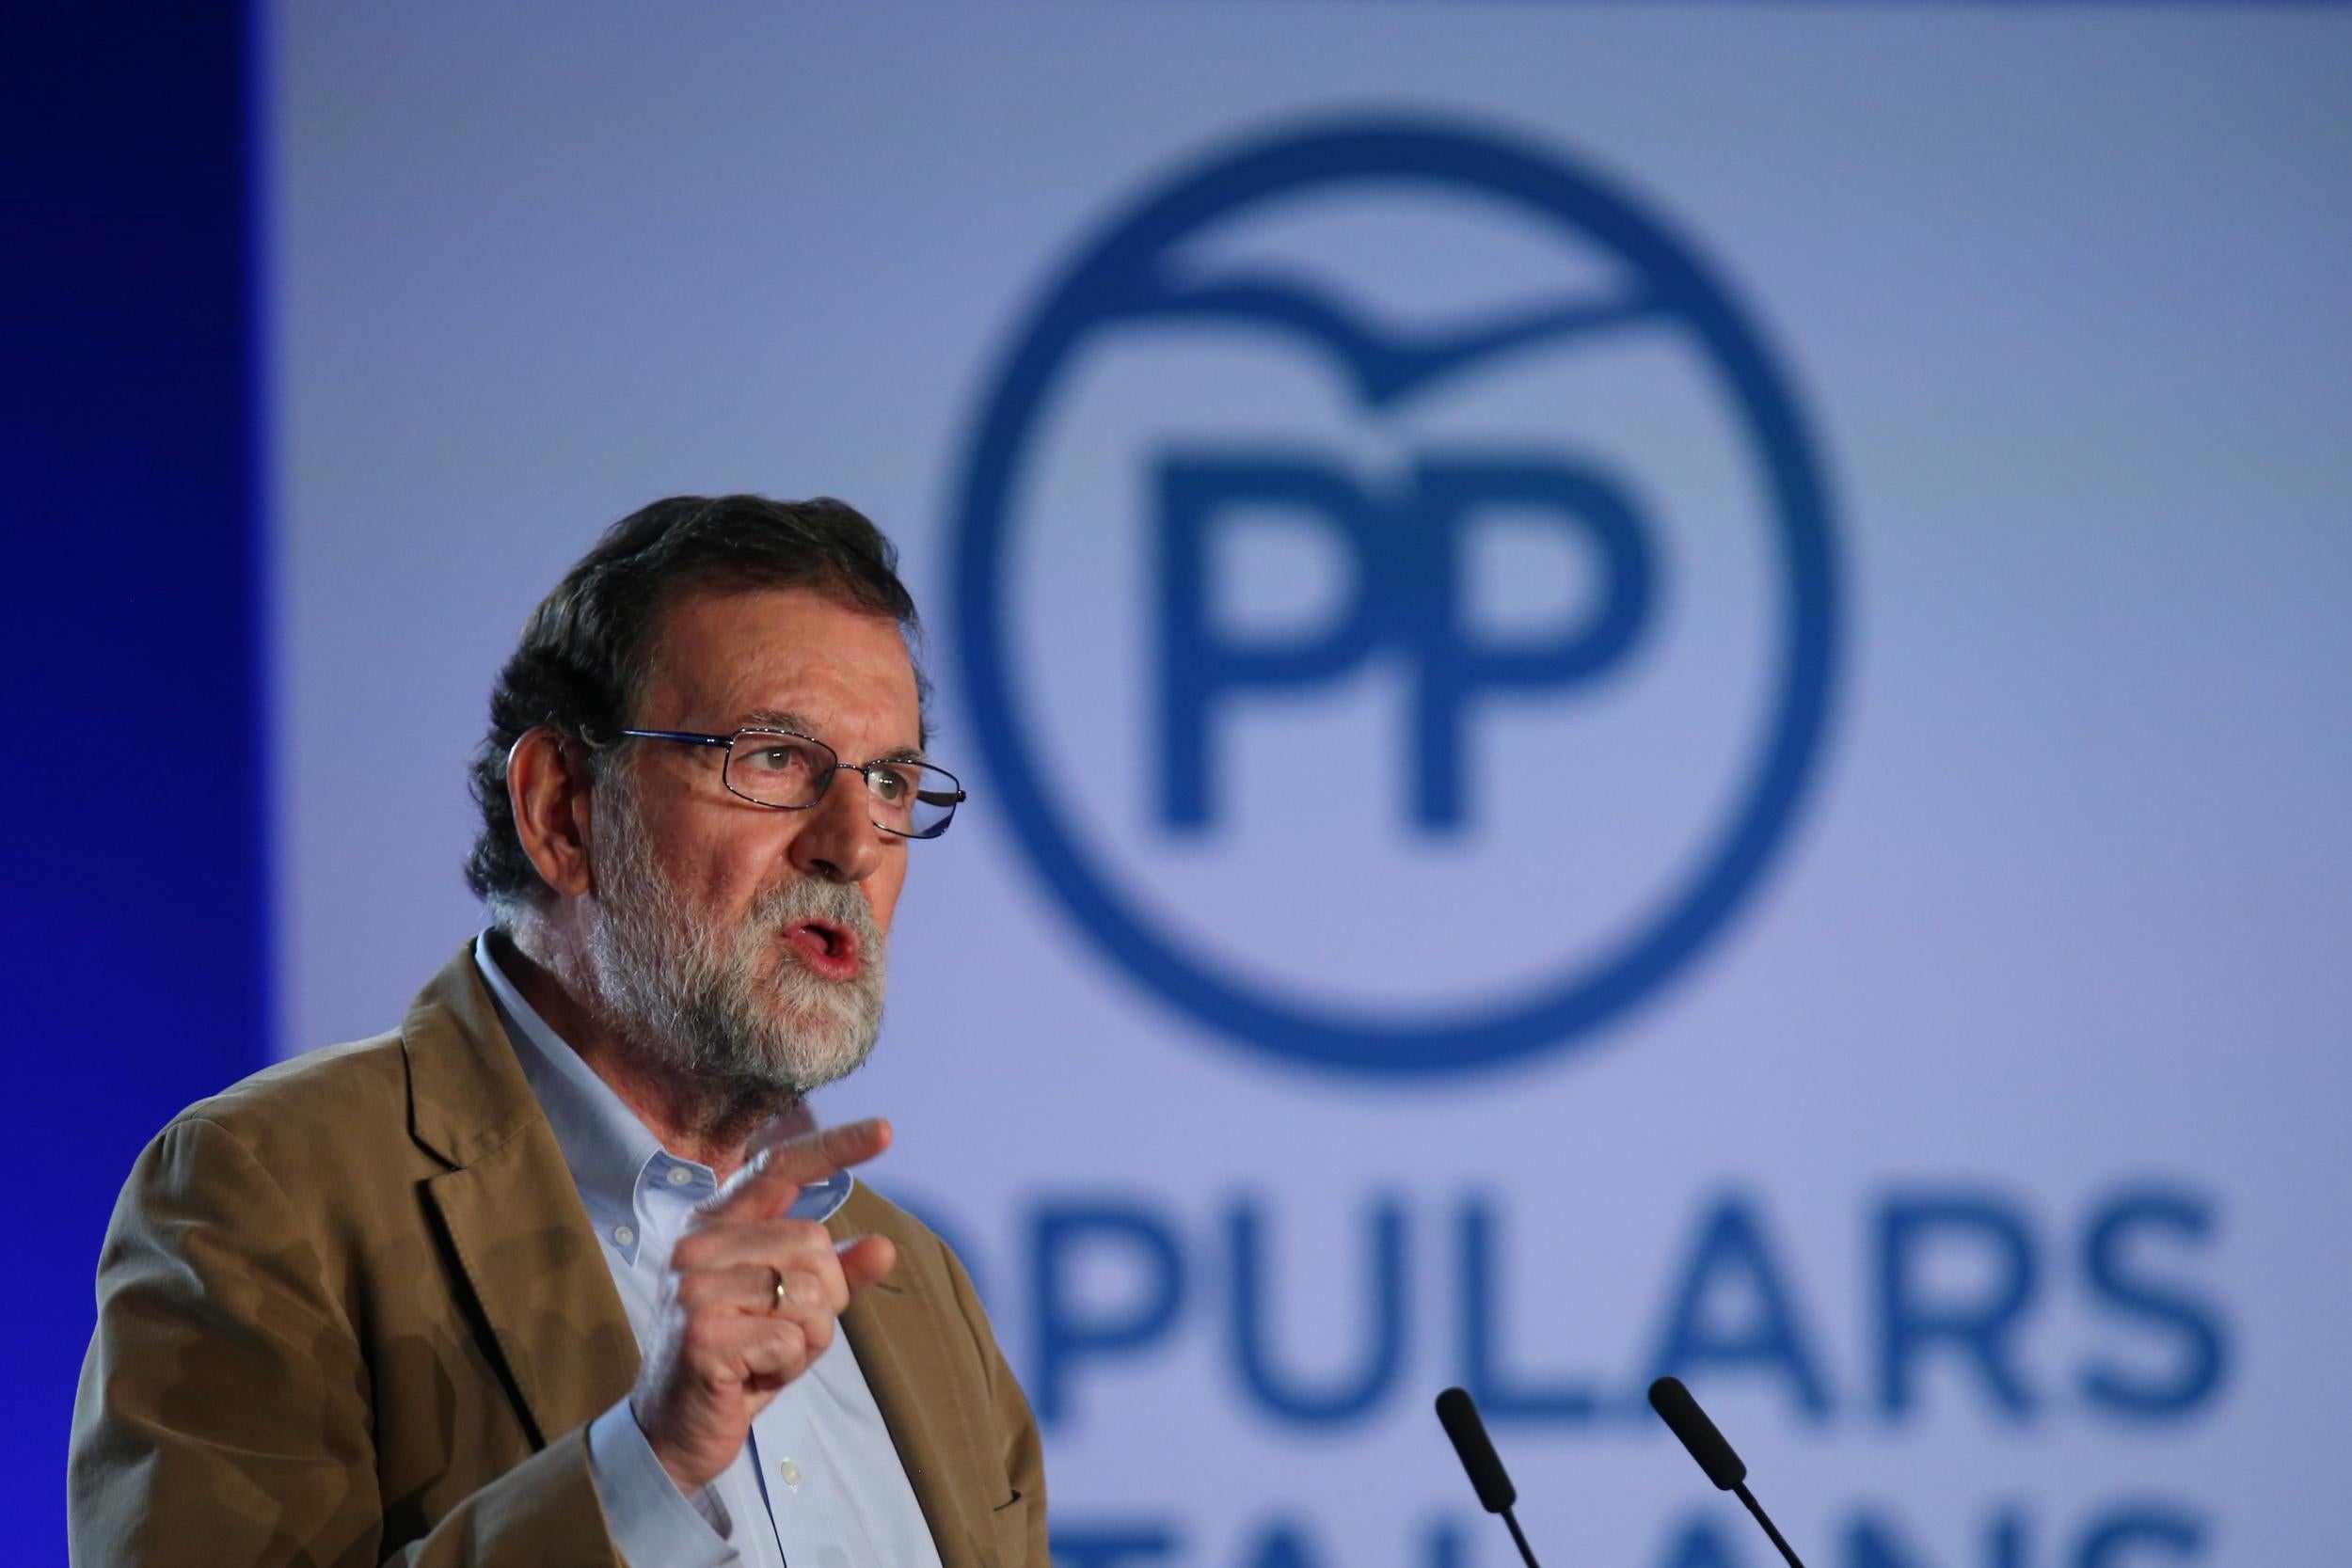 Mr Rajoy seems to be a slow and reluctant student in matters of Catalan politics